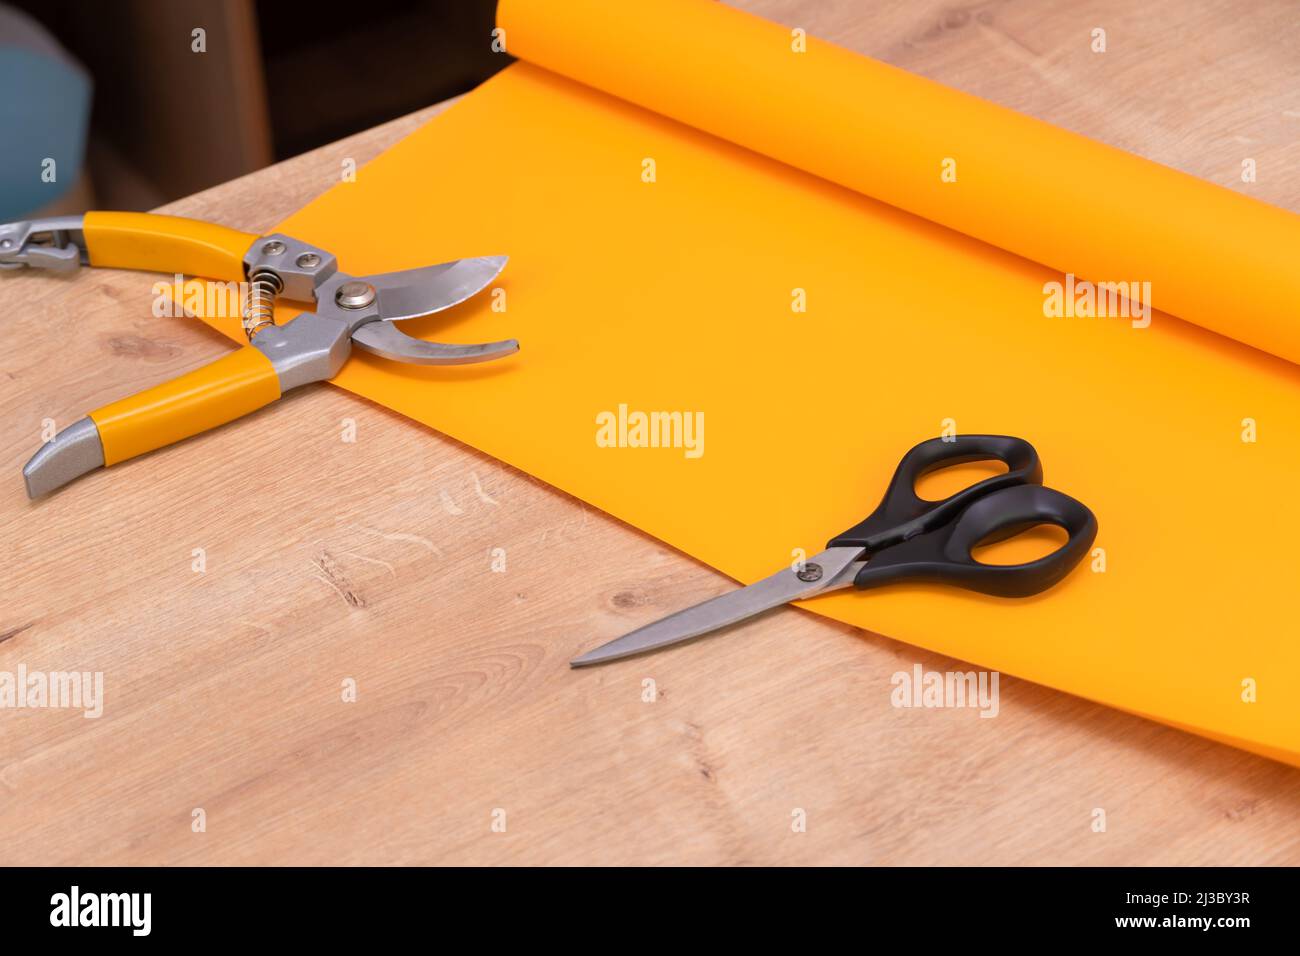 Close-up of a roll of orange wrapping paper, scissors, pruning